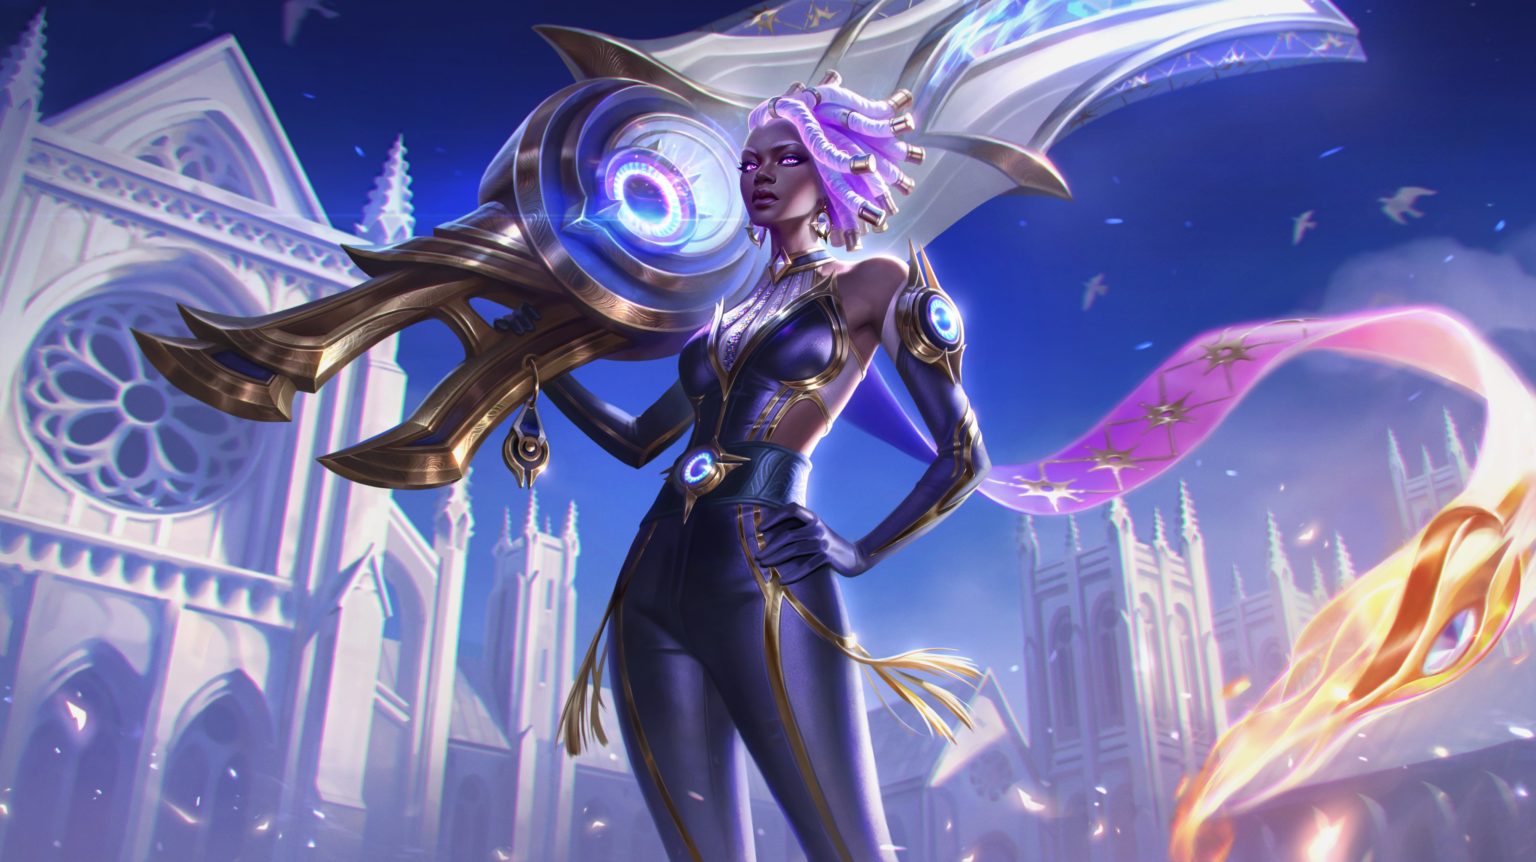 The amount of RP given by Prime Gaming in League of Legends capsules will decrease!